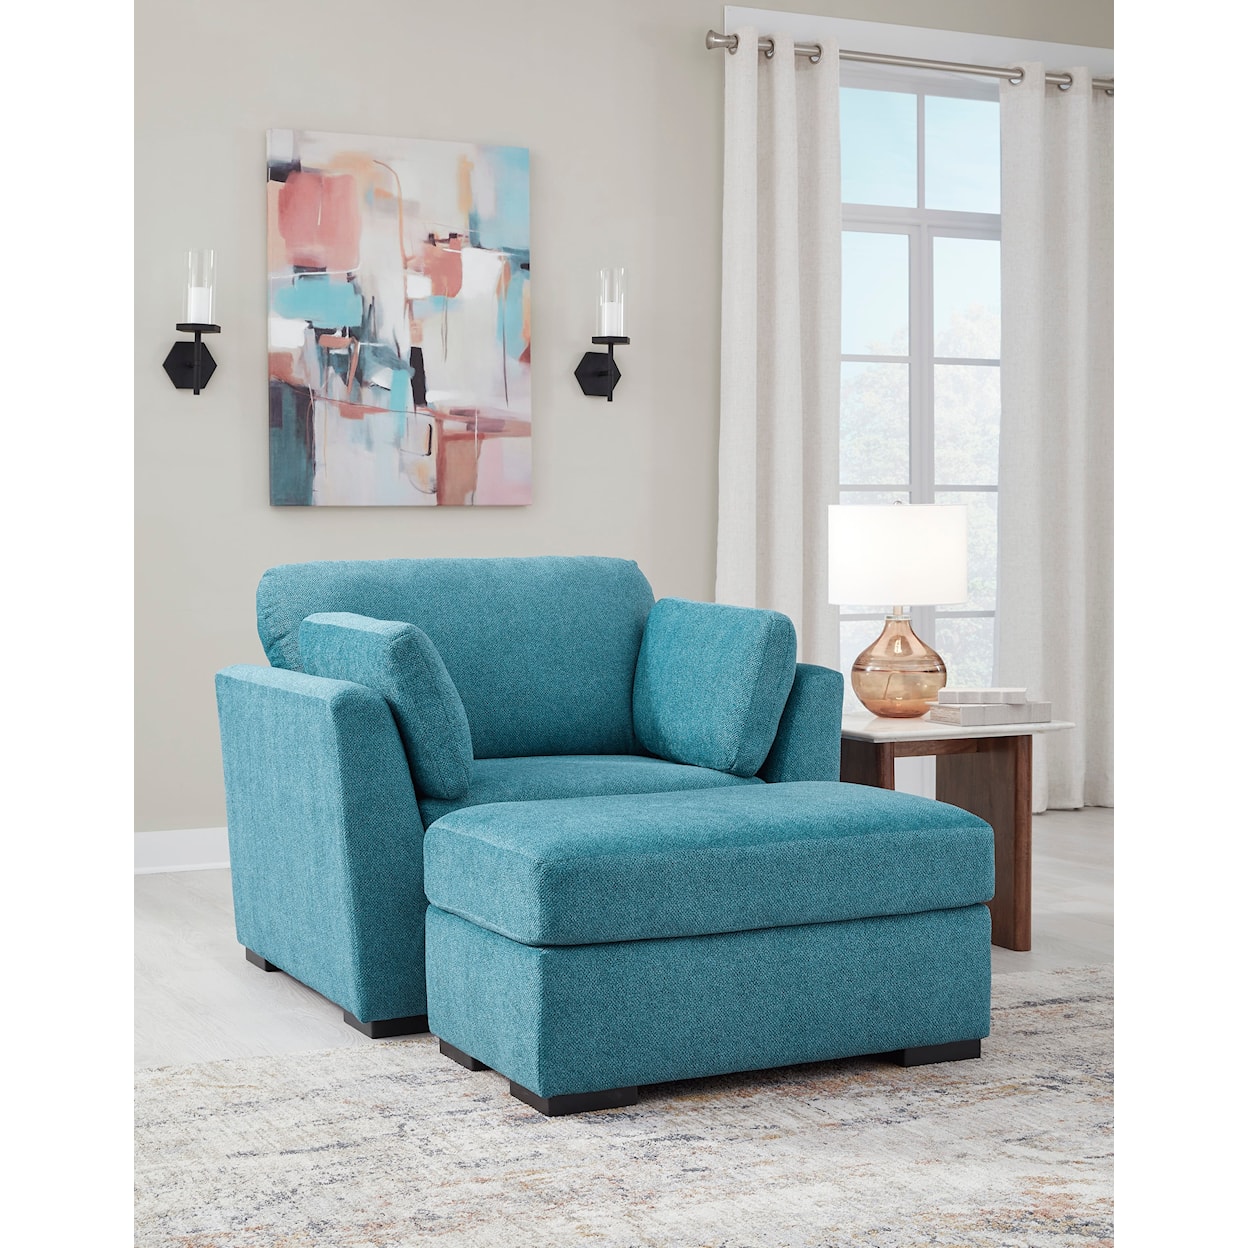 Signature Design by Ashley Keerwick Oversized Chair And Ottoman